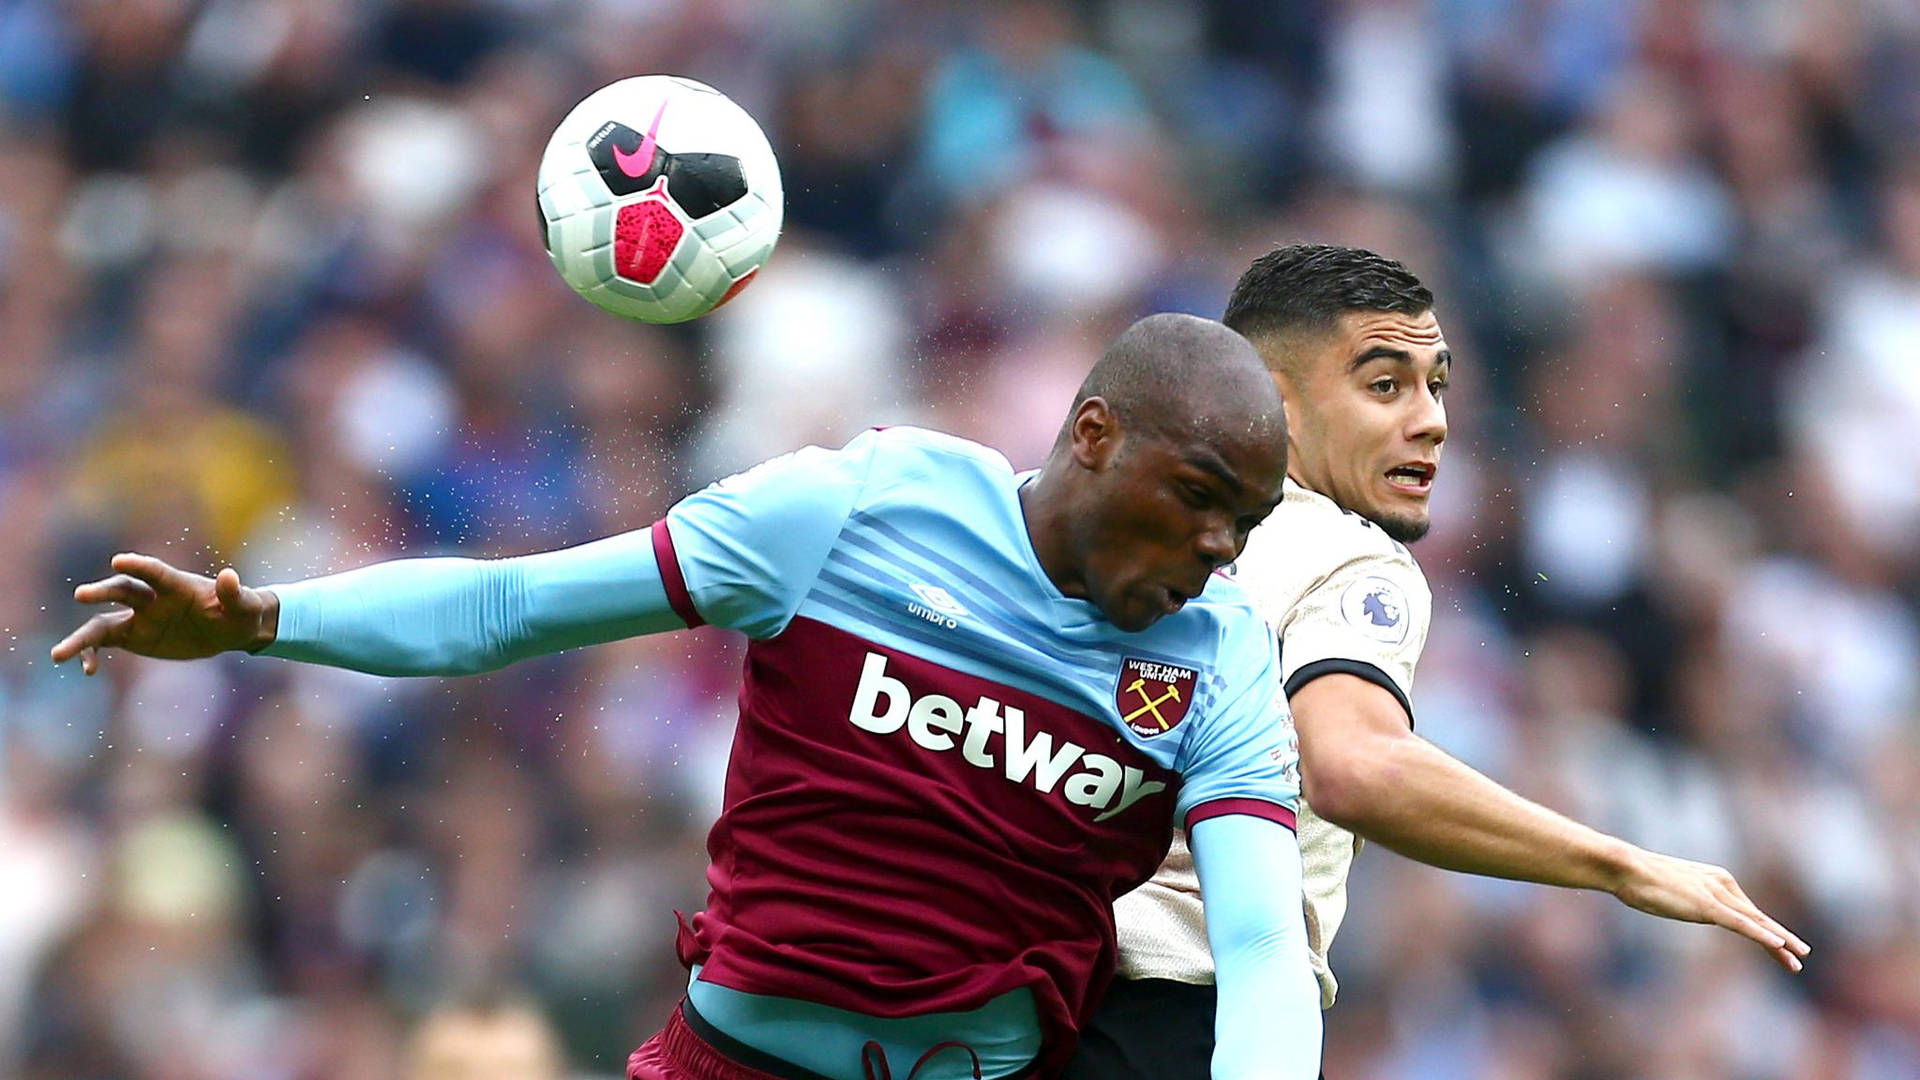 Angelo Ogbonna In Action On Field Wallpaper